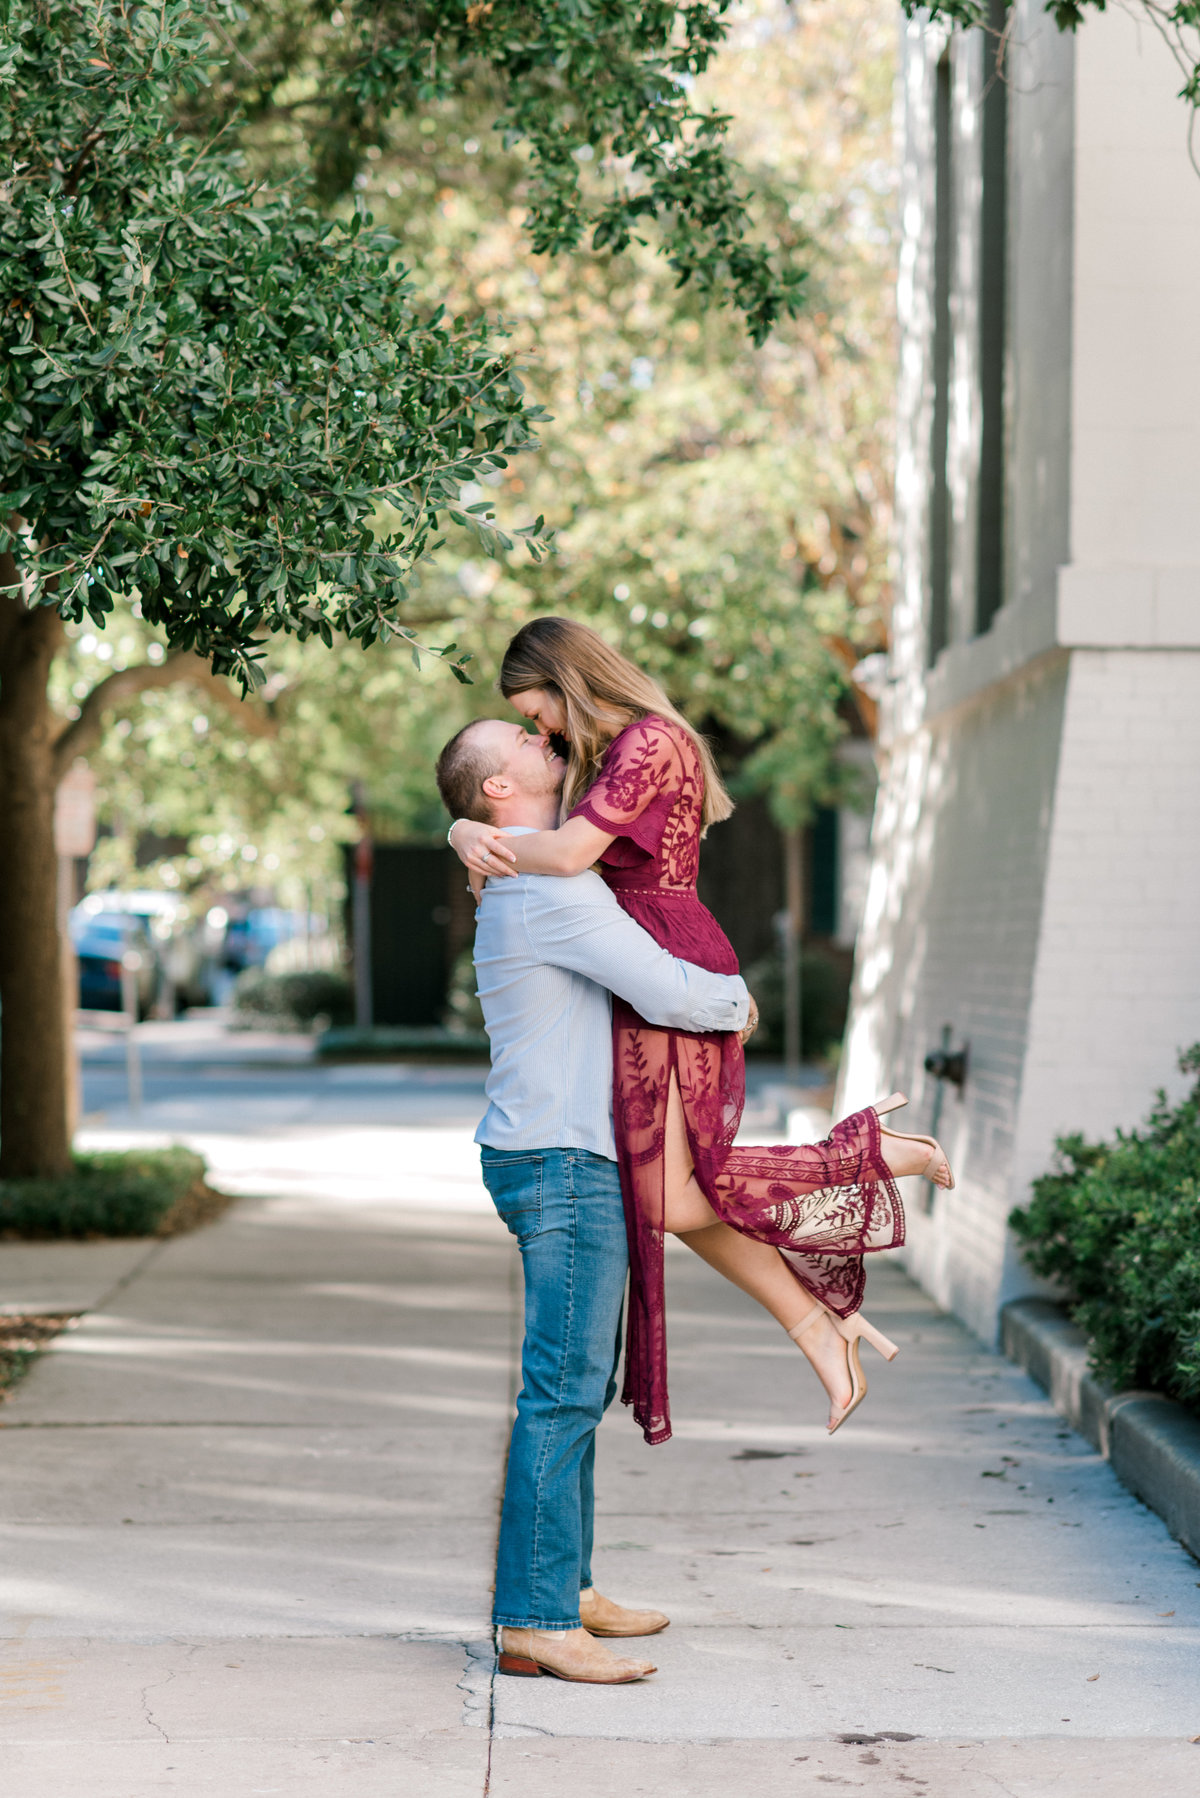 Guy lifts girl during  engagement session